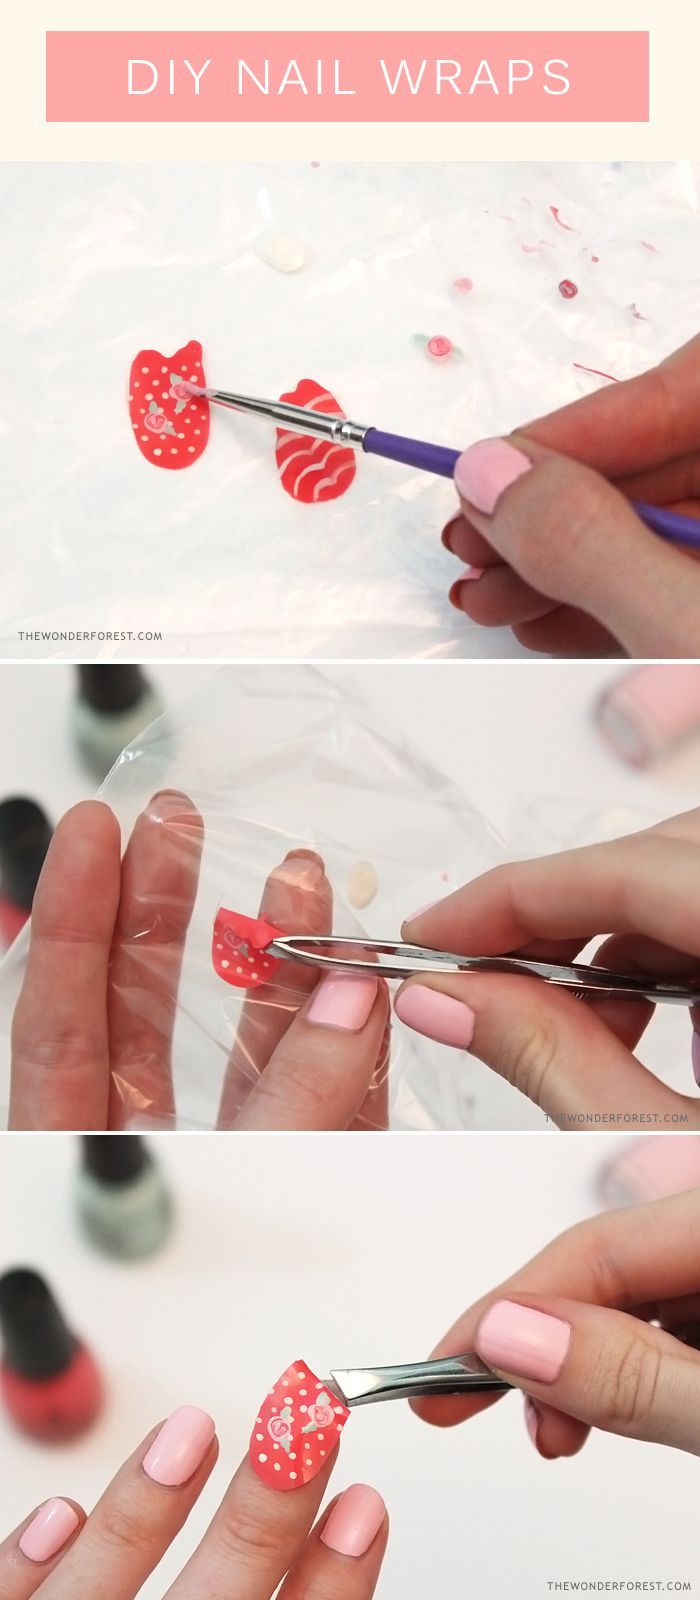 Make Your Own Nail Wraps! - Wonder Forest -   18 diy projects Awesome nail polish ideas